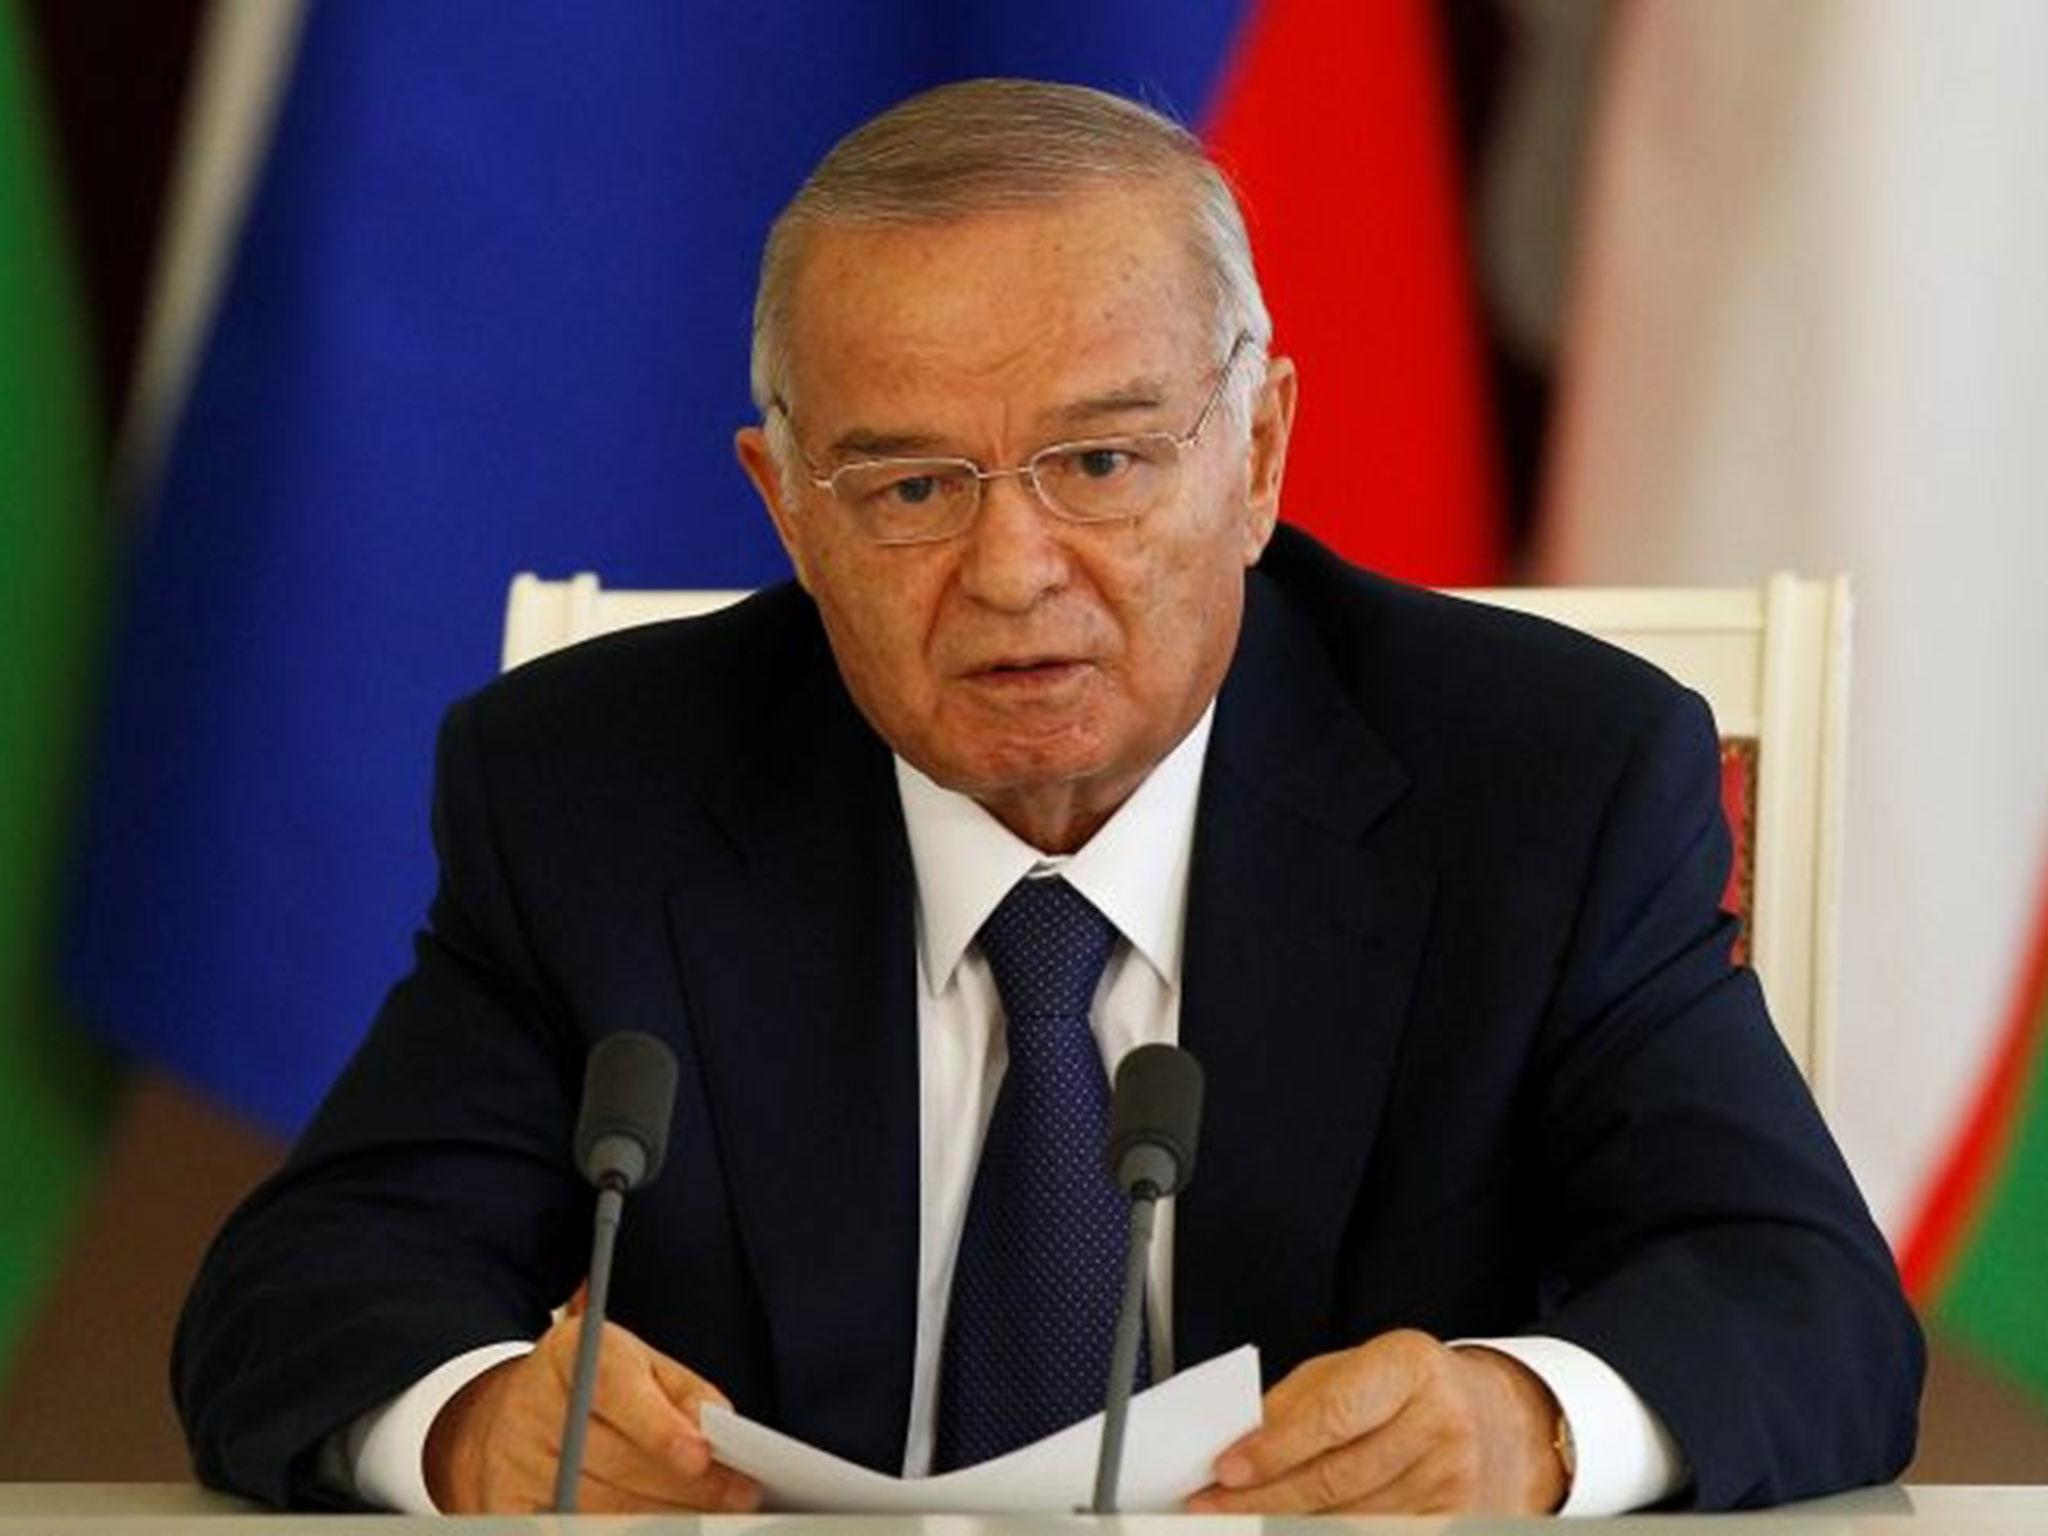 Uzbekistan's President Islam Karimov suffered a stroke and has been in hospital since Saturday 27 August